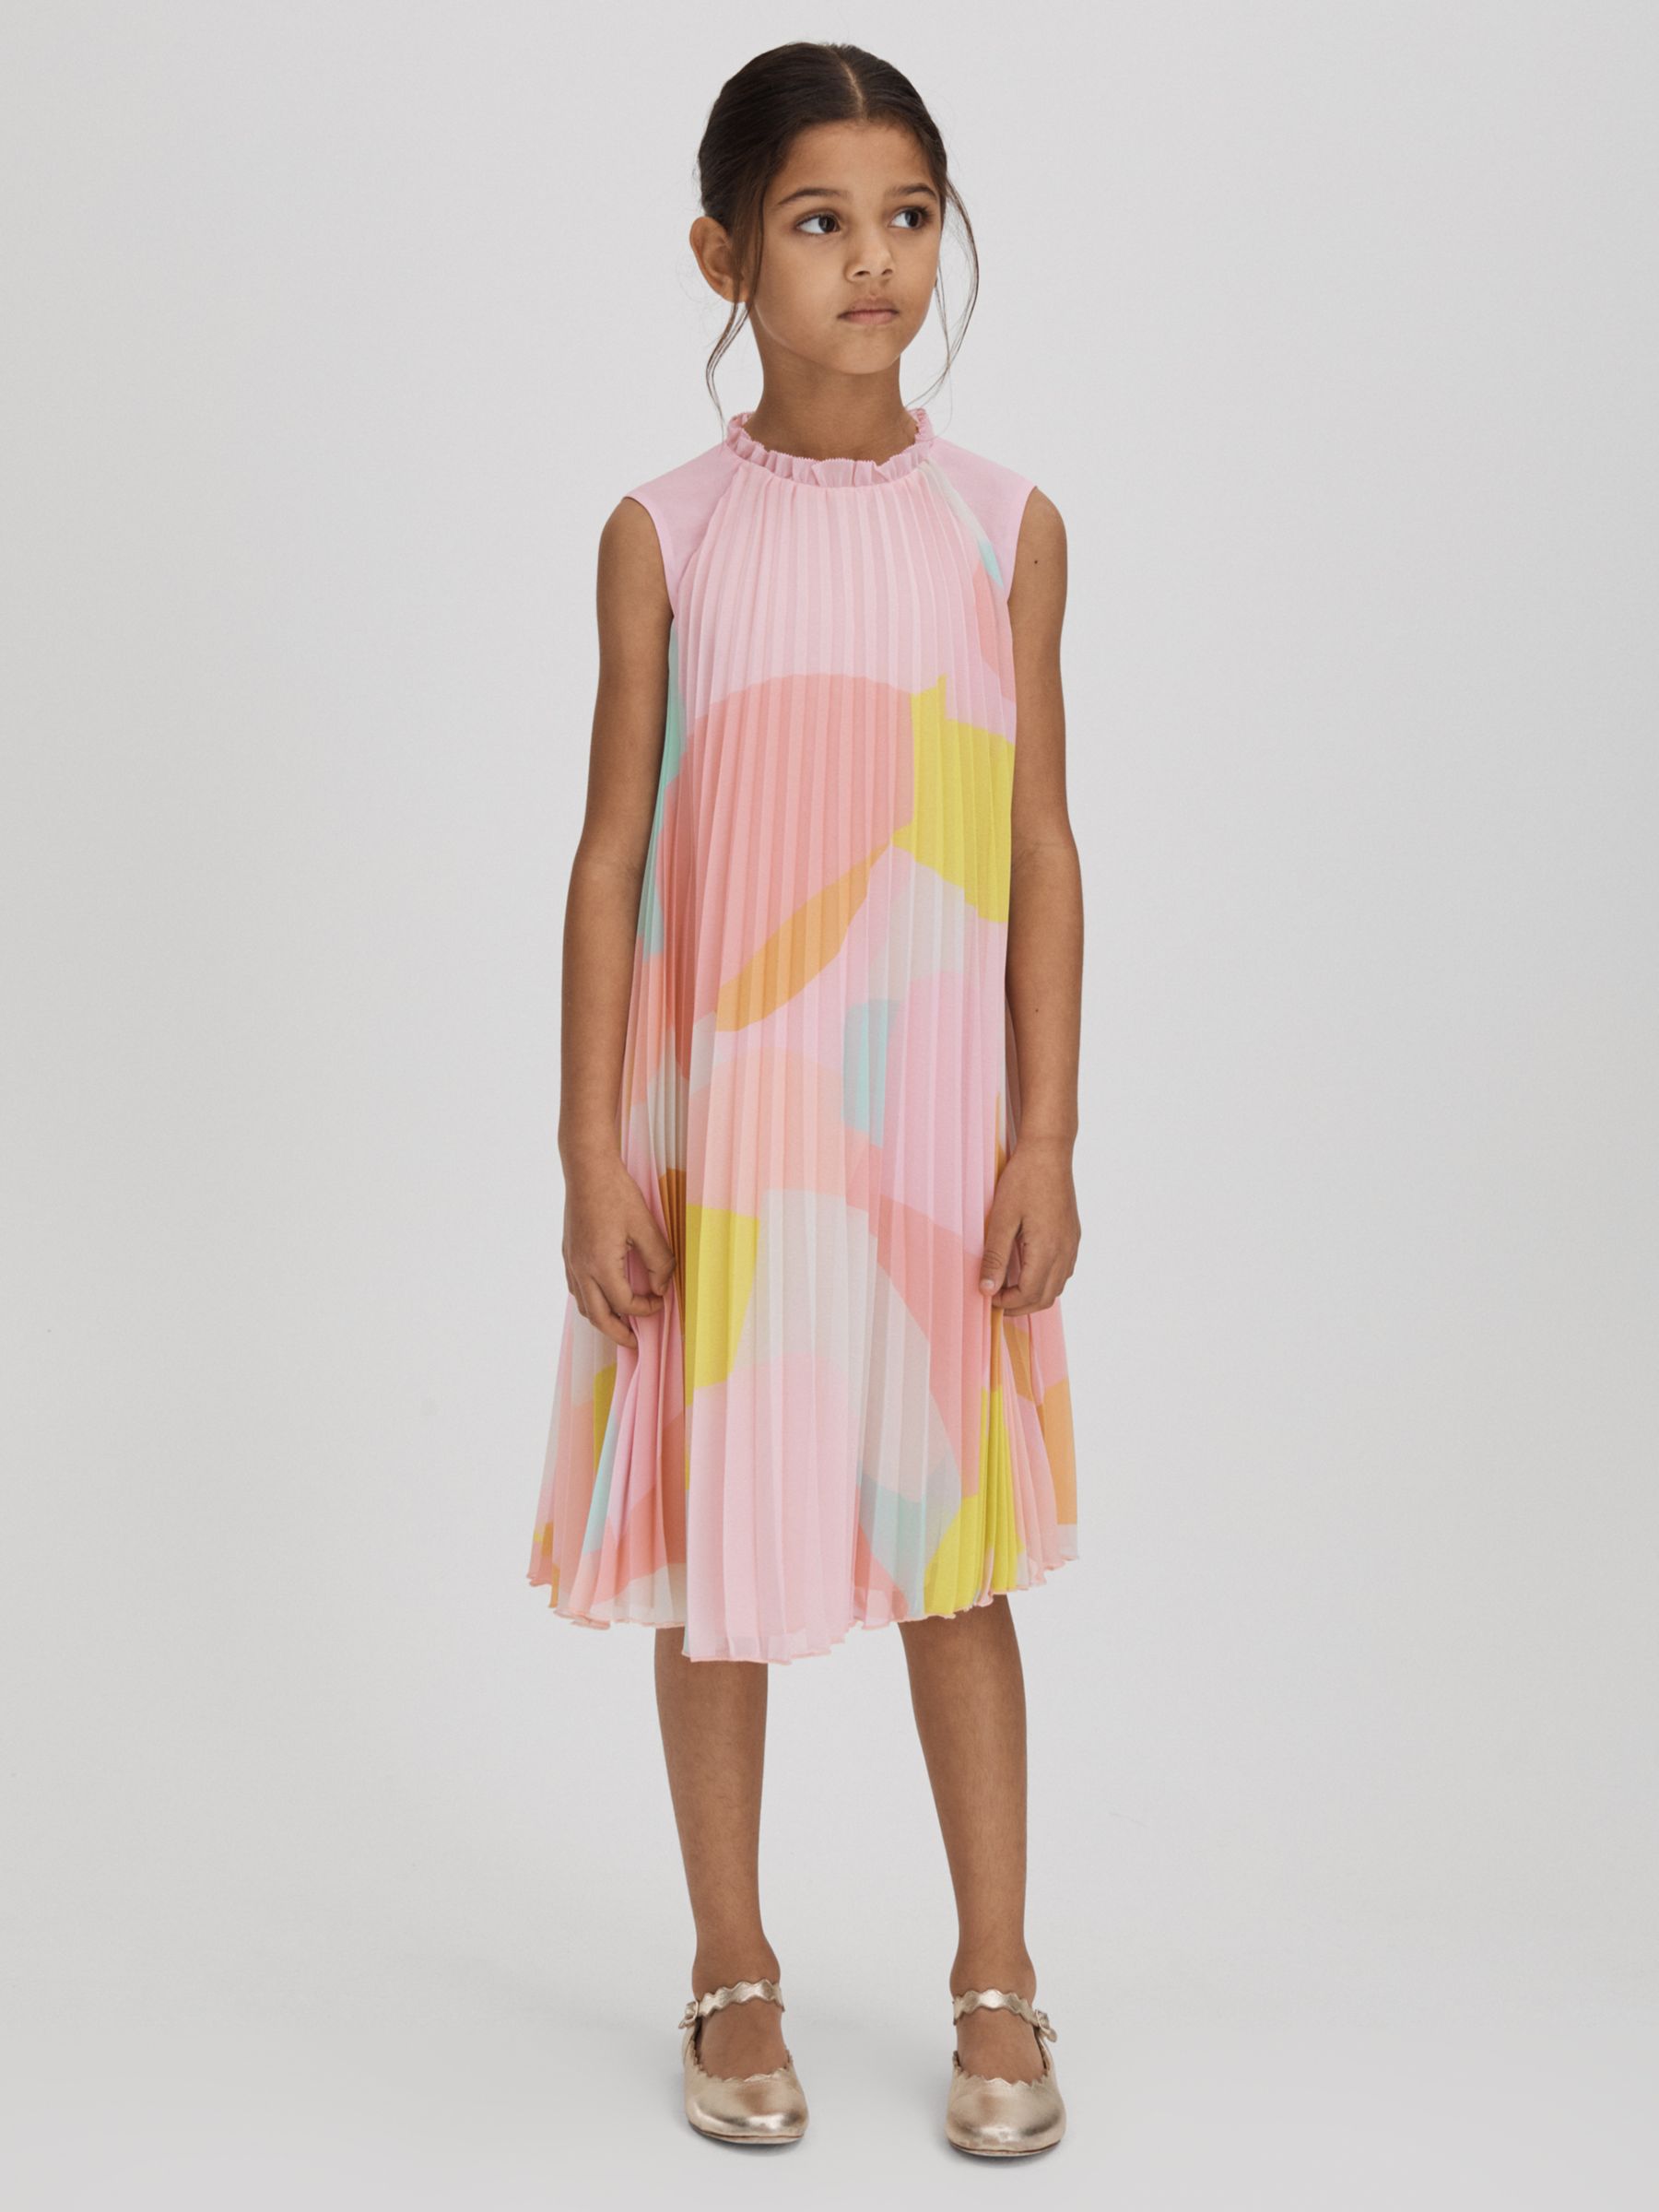 Reiss Kids' Pixie Abstract Print Ruffle Pleated Dress, Pink/Multi, 9-10Y